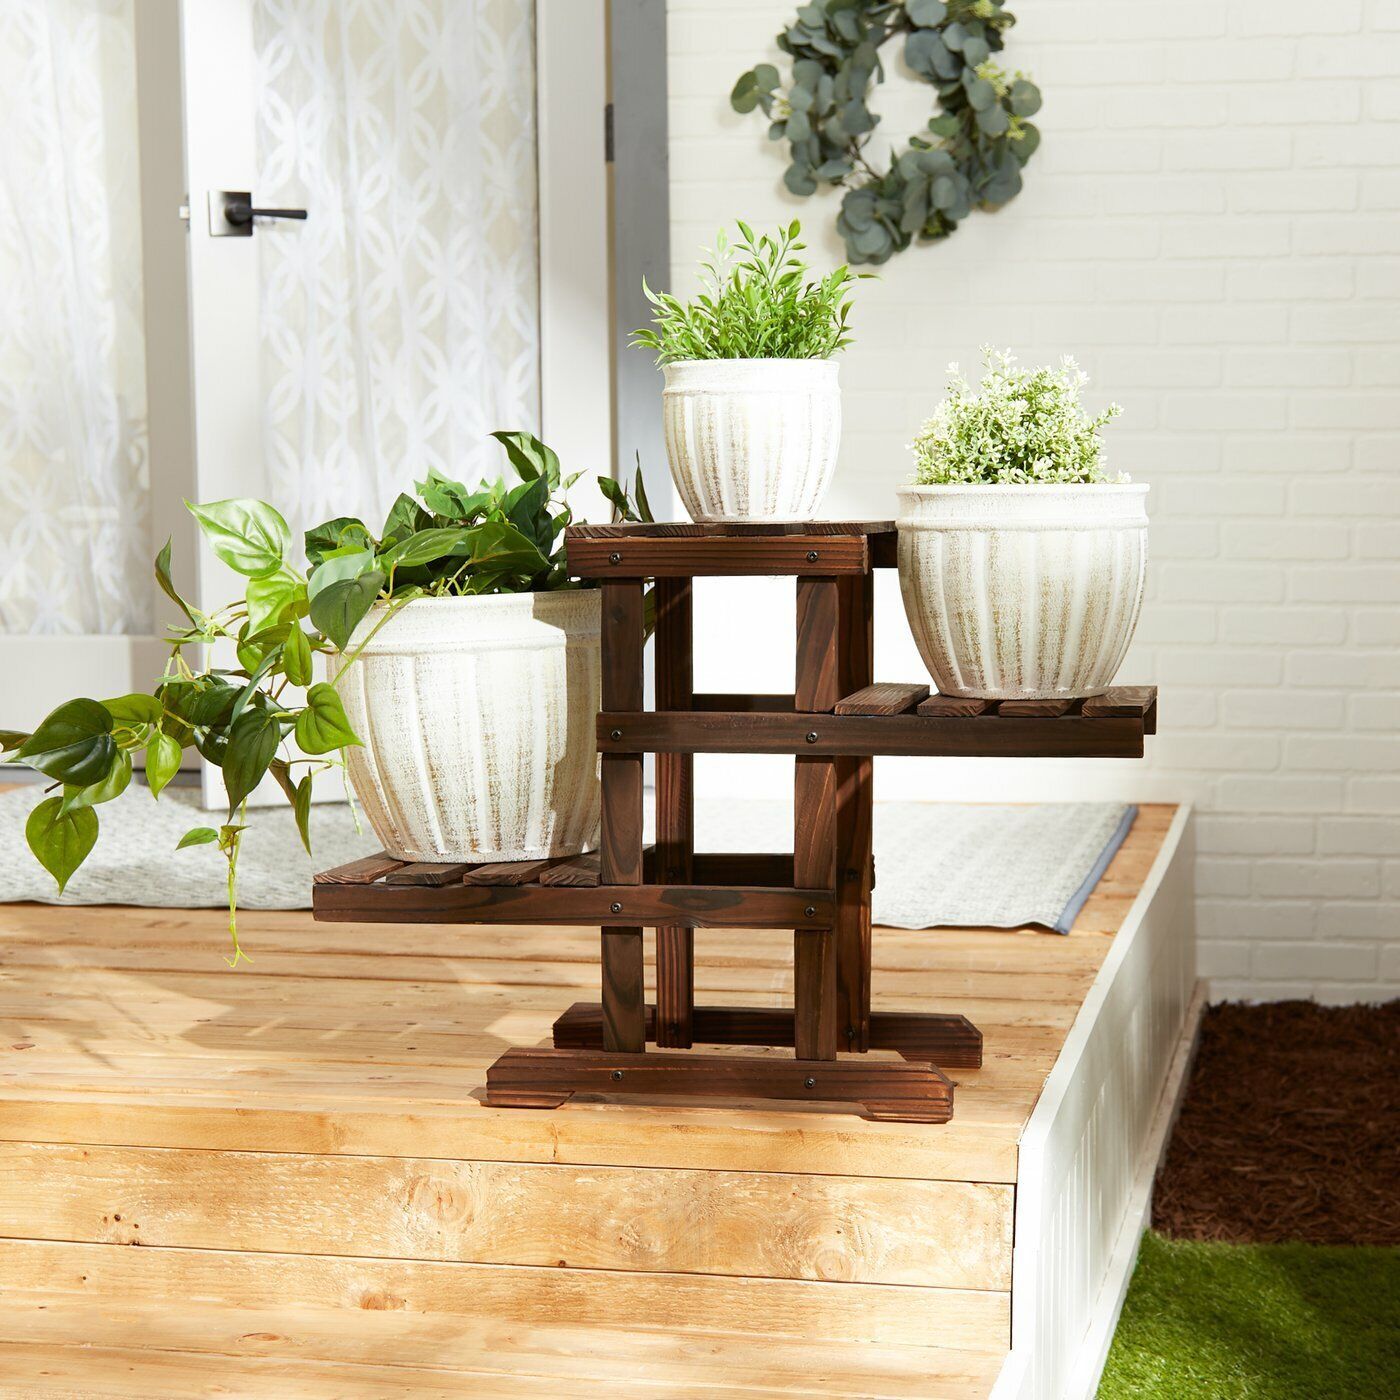 Rustic Farm House Style Indoor Outdoor Garden Planter Plant Stand With 3  Shelf | Ebay With Rustic Plant Stands (View 14 of 15)